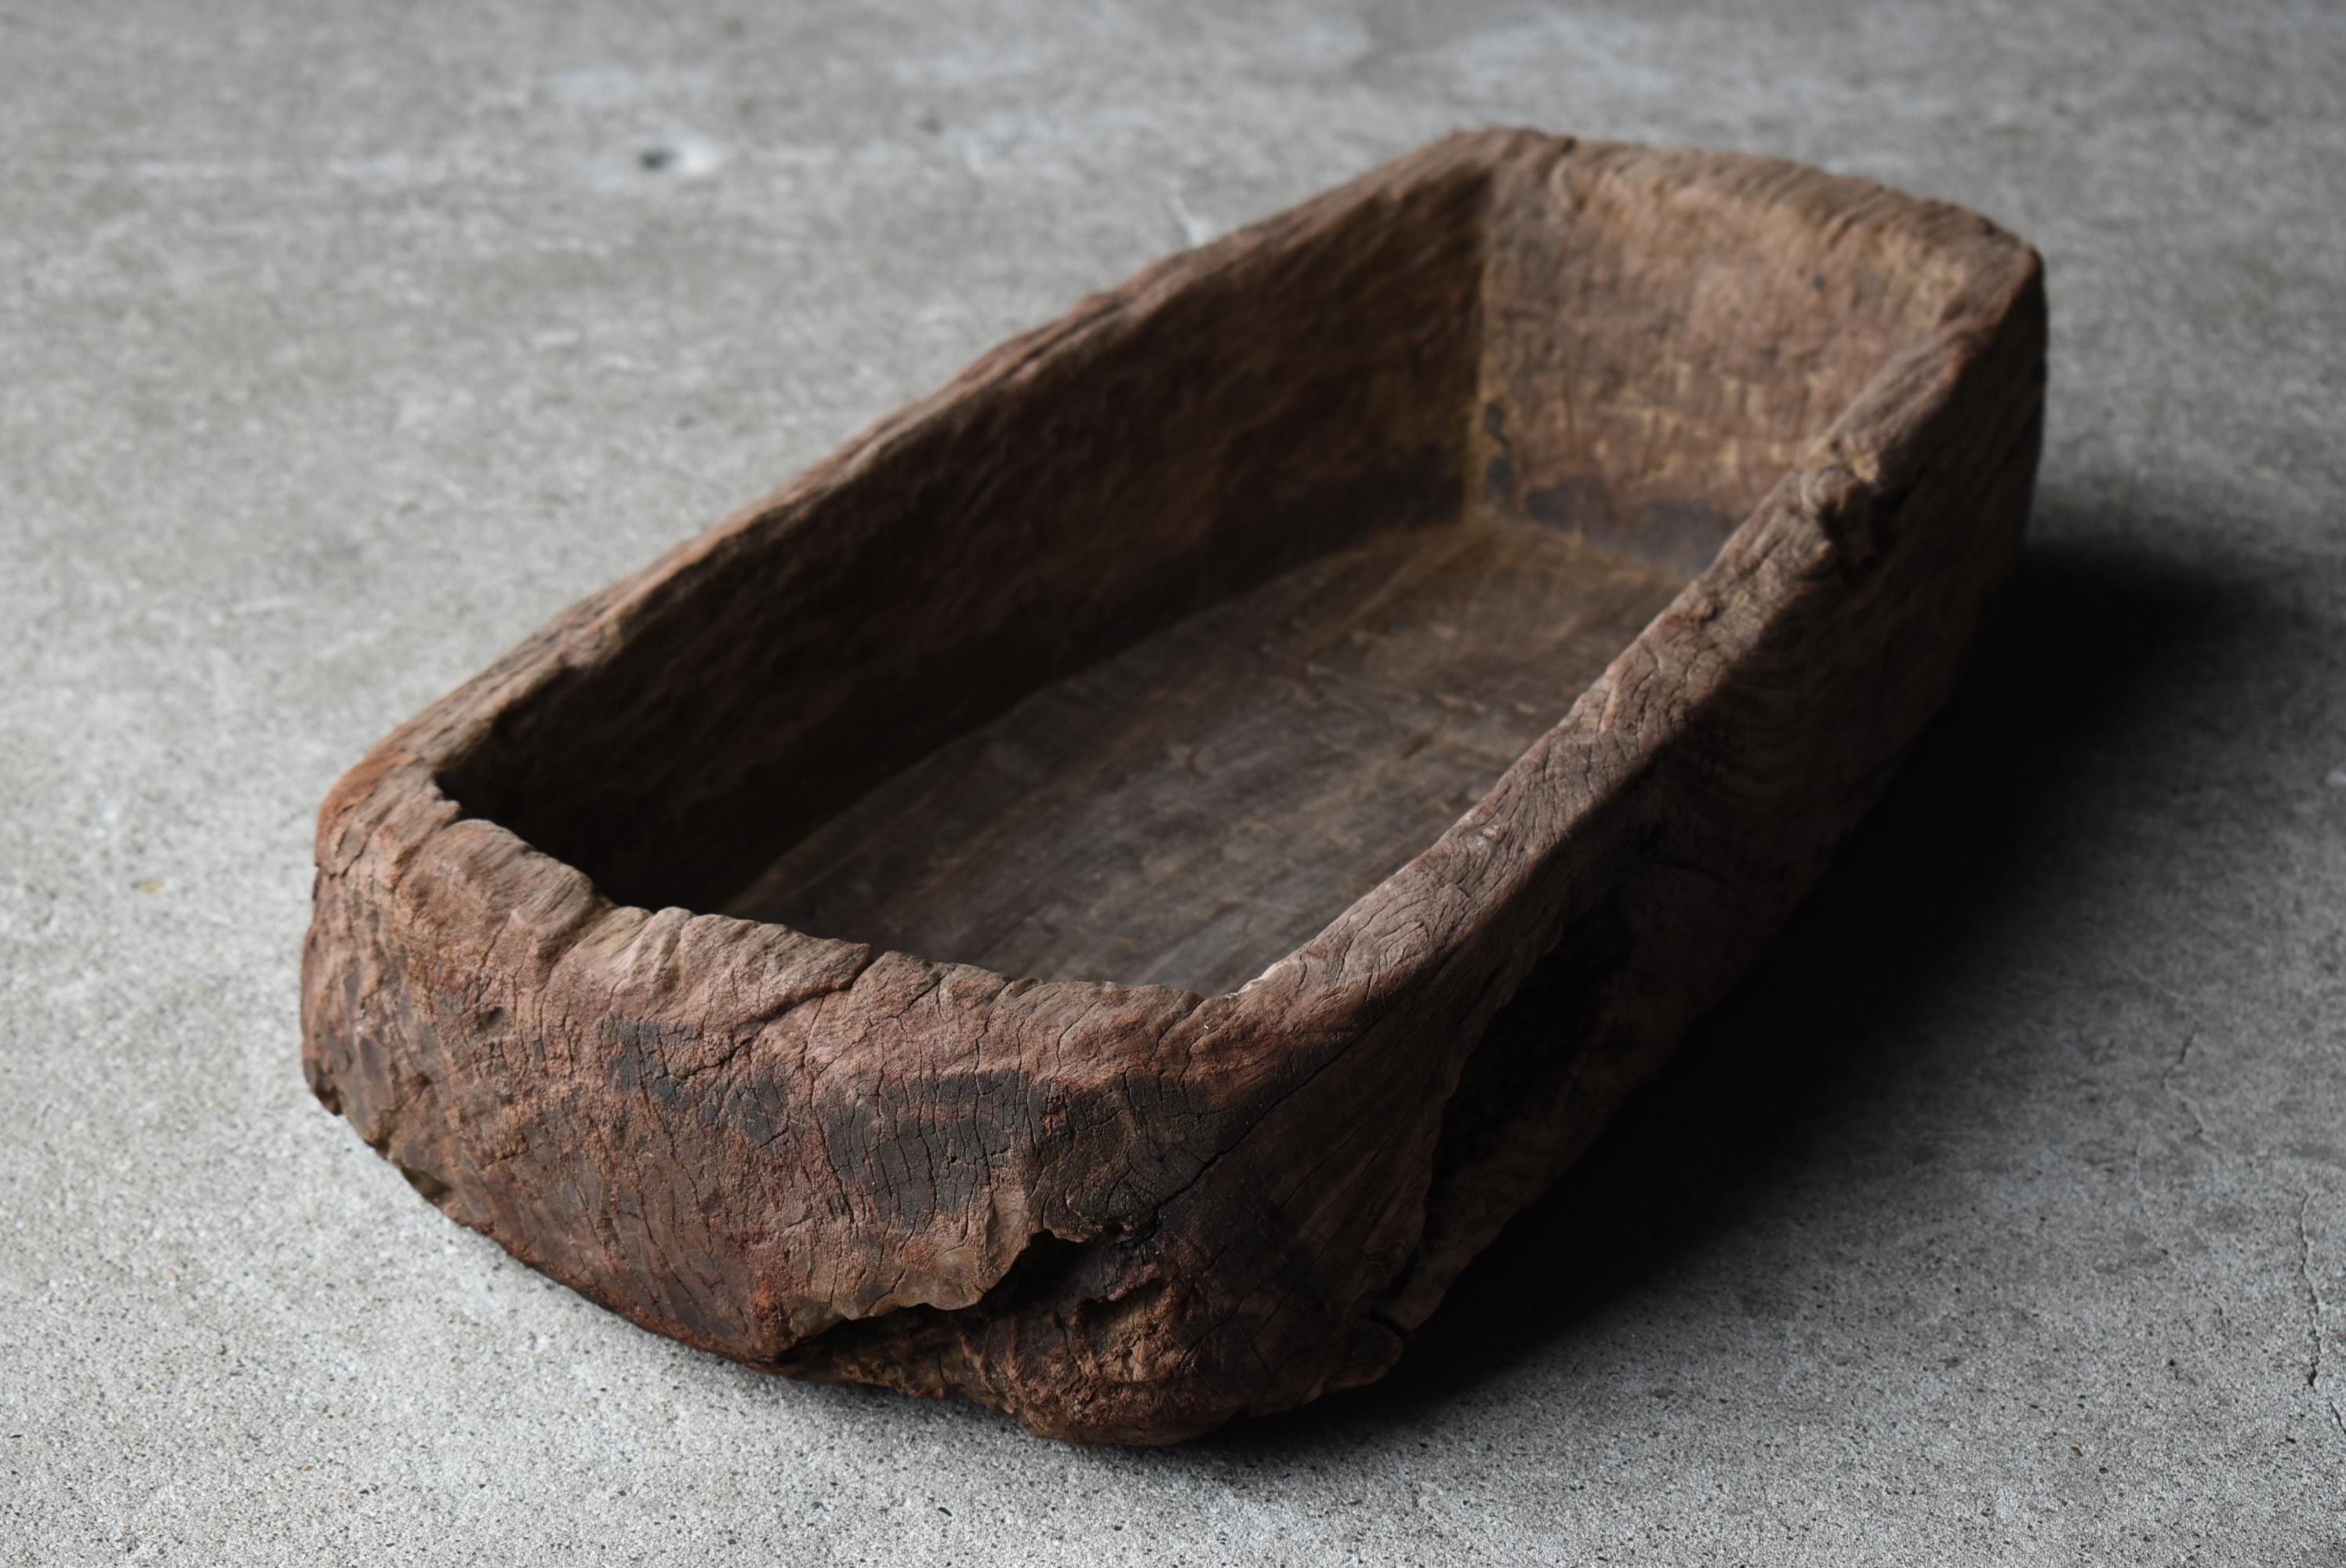 This is a very old wooden bowl made in Japan.
It is from the Meiji period (1860s-1900s).
The material is made of teak.

It is a dynamic piece carved from a single large teak tree.
The unevenness of the wood used for a long time is beautiful.

It is